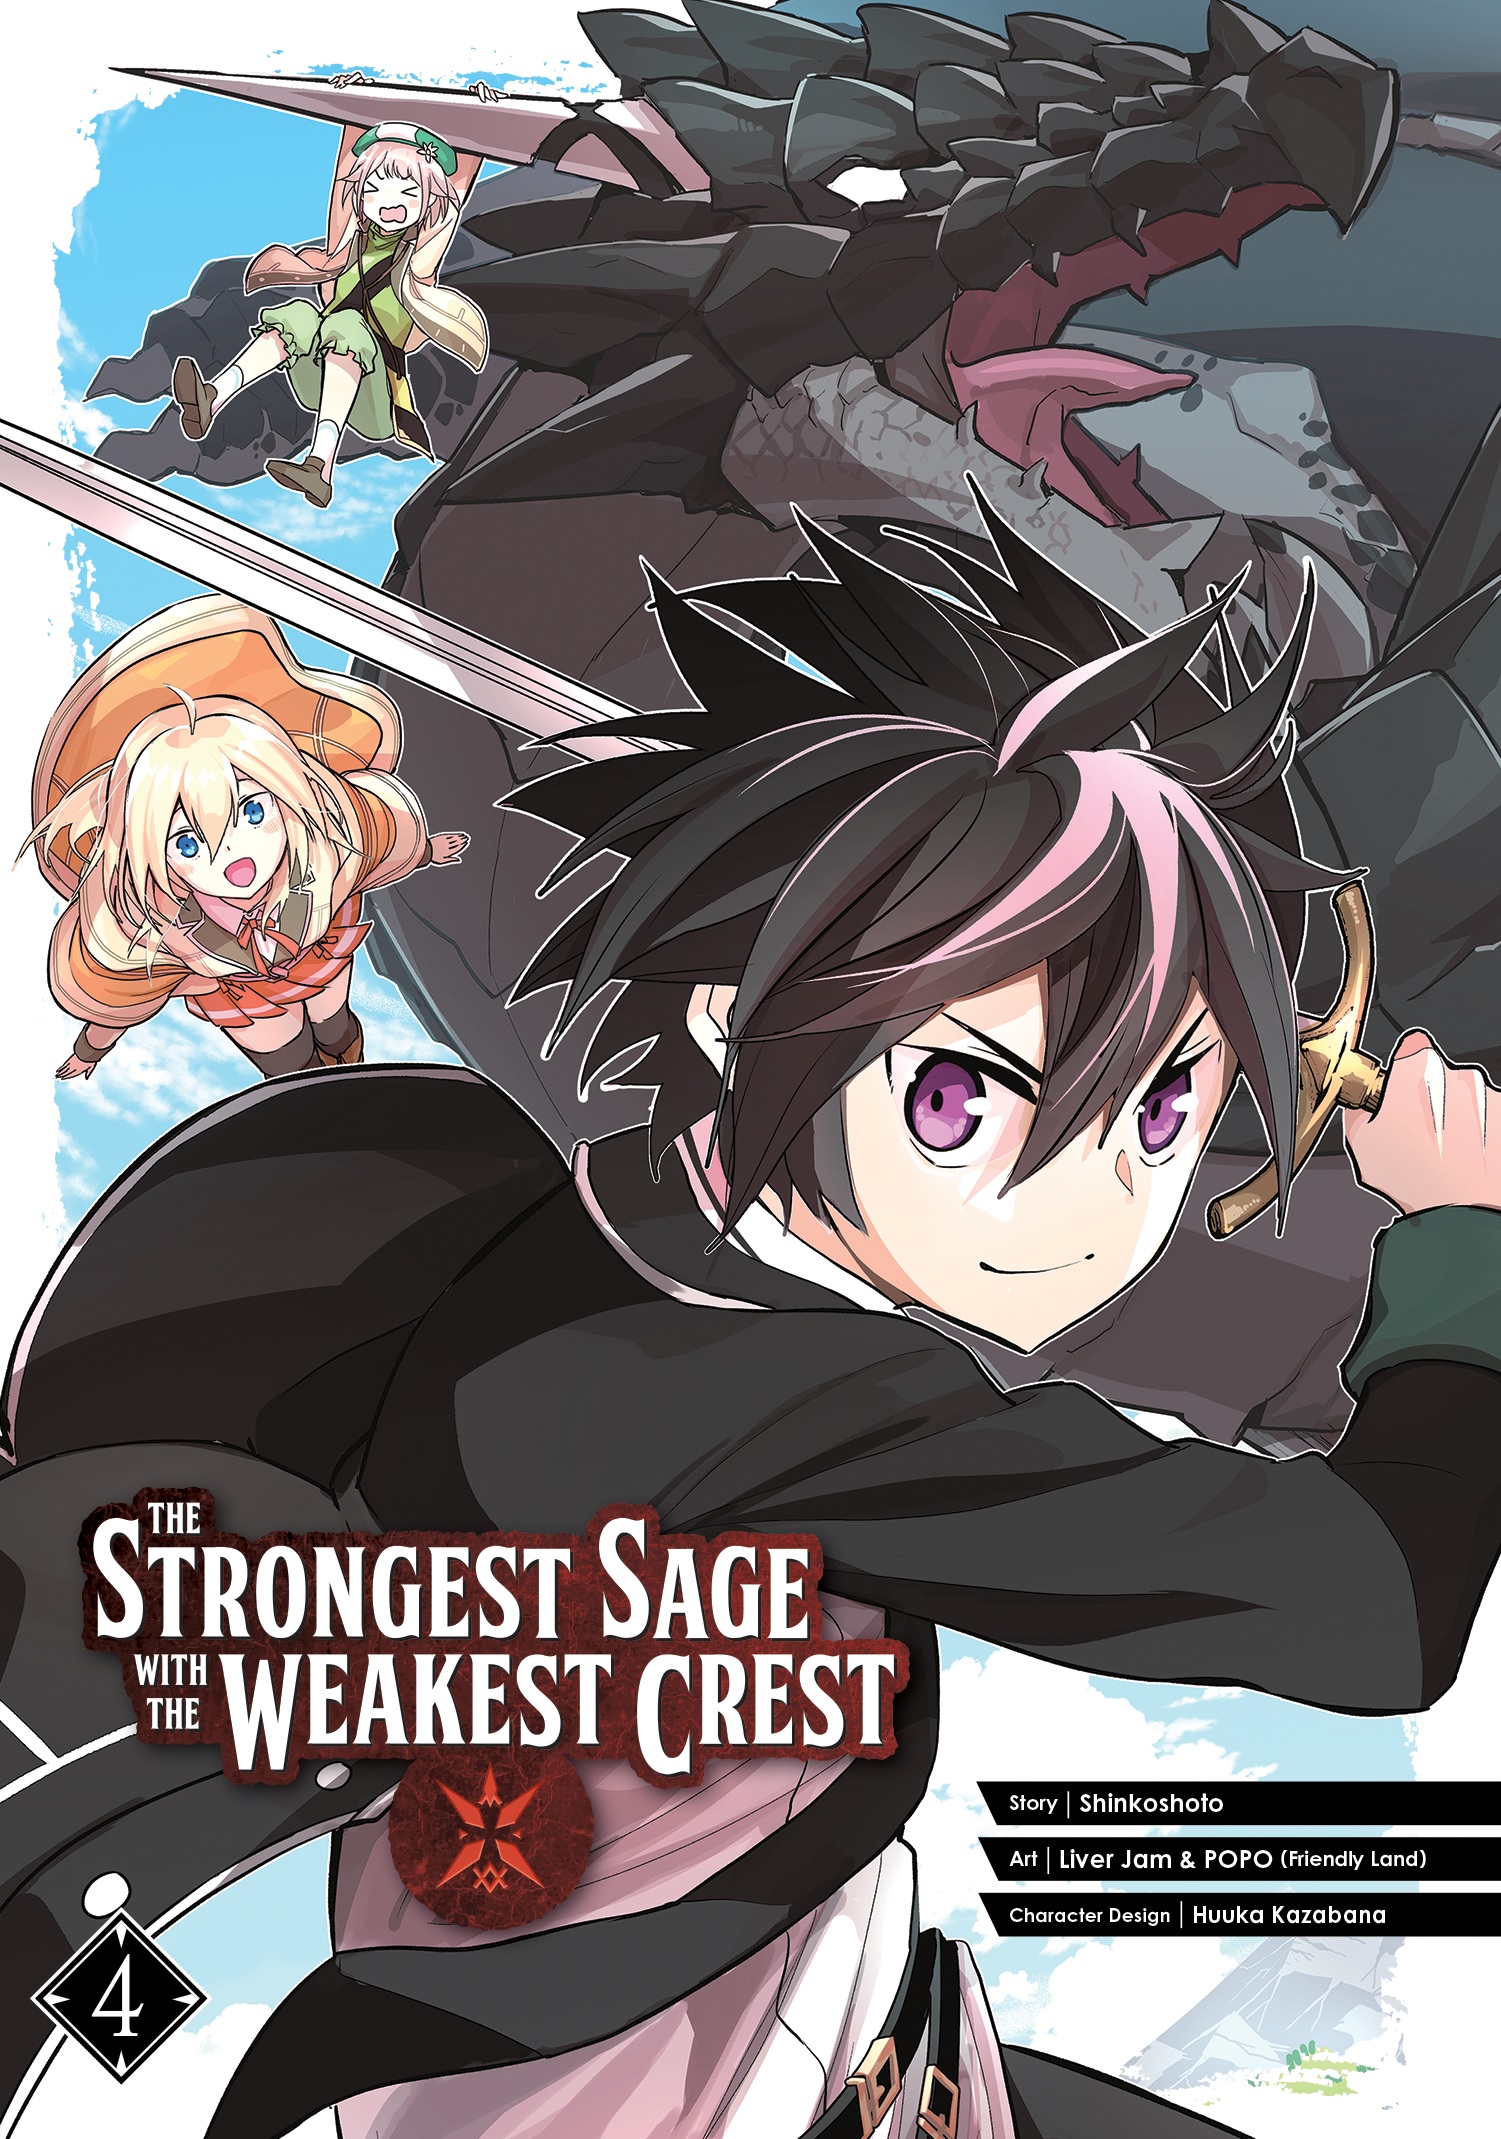 The Strongest Sage With the Weakest Crest - Volume 4